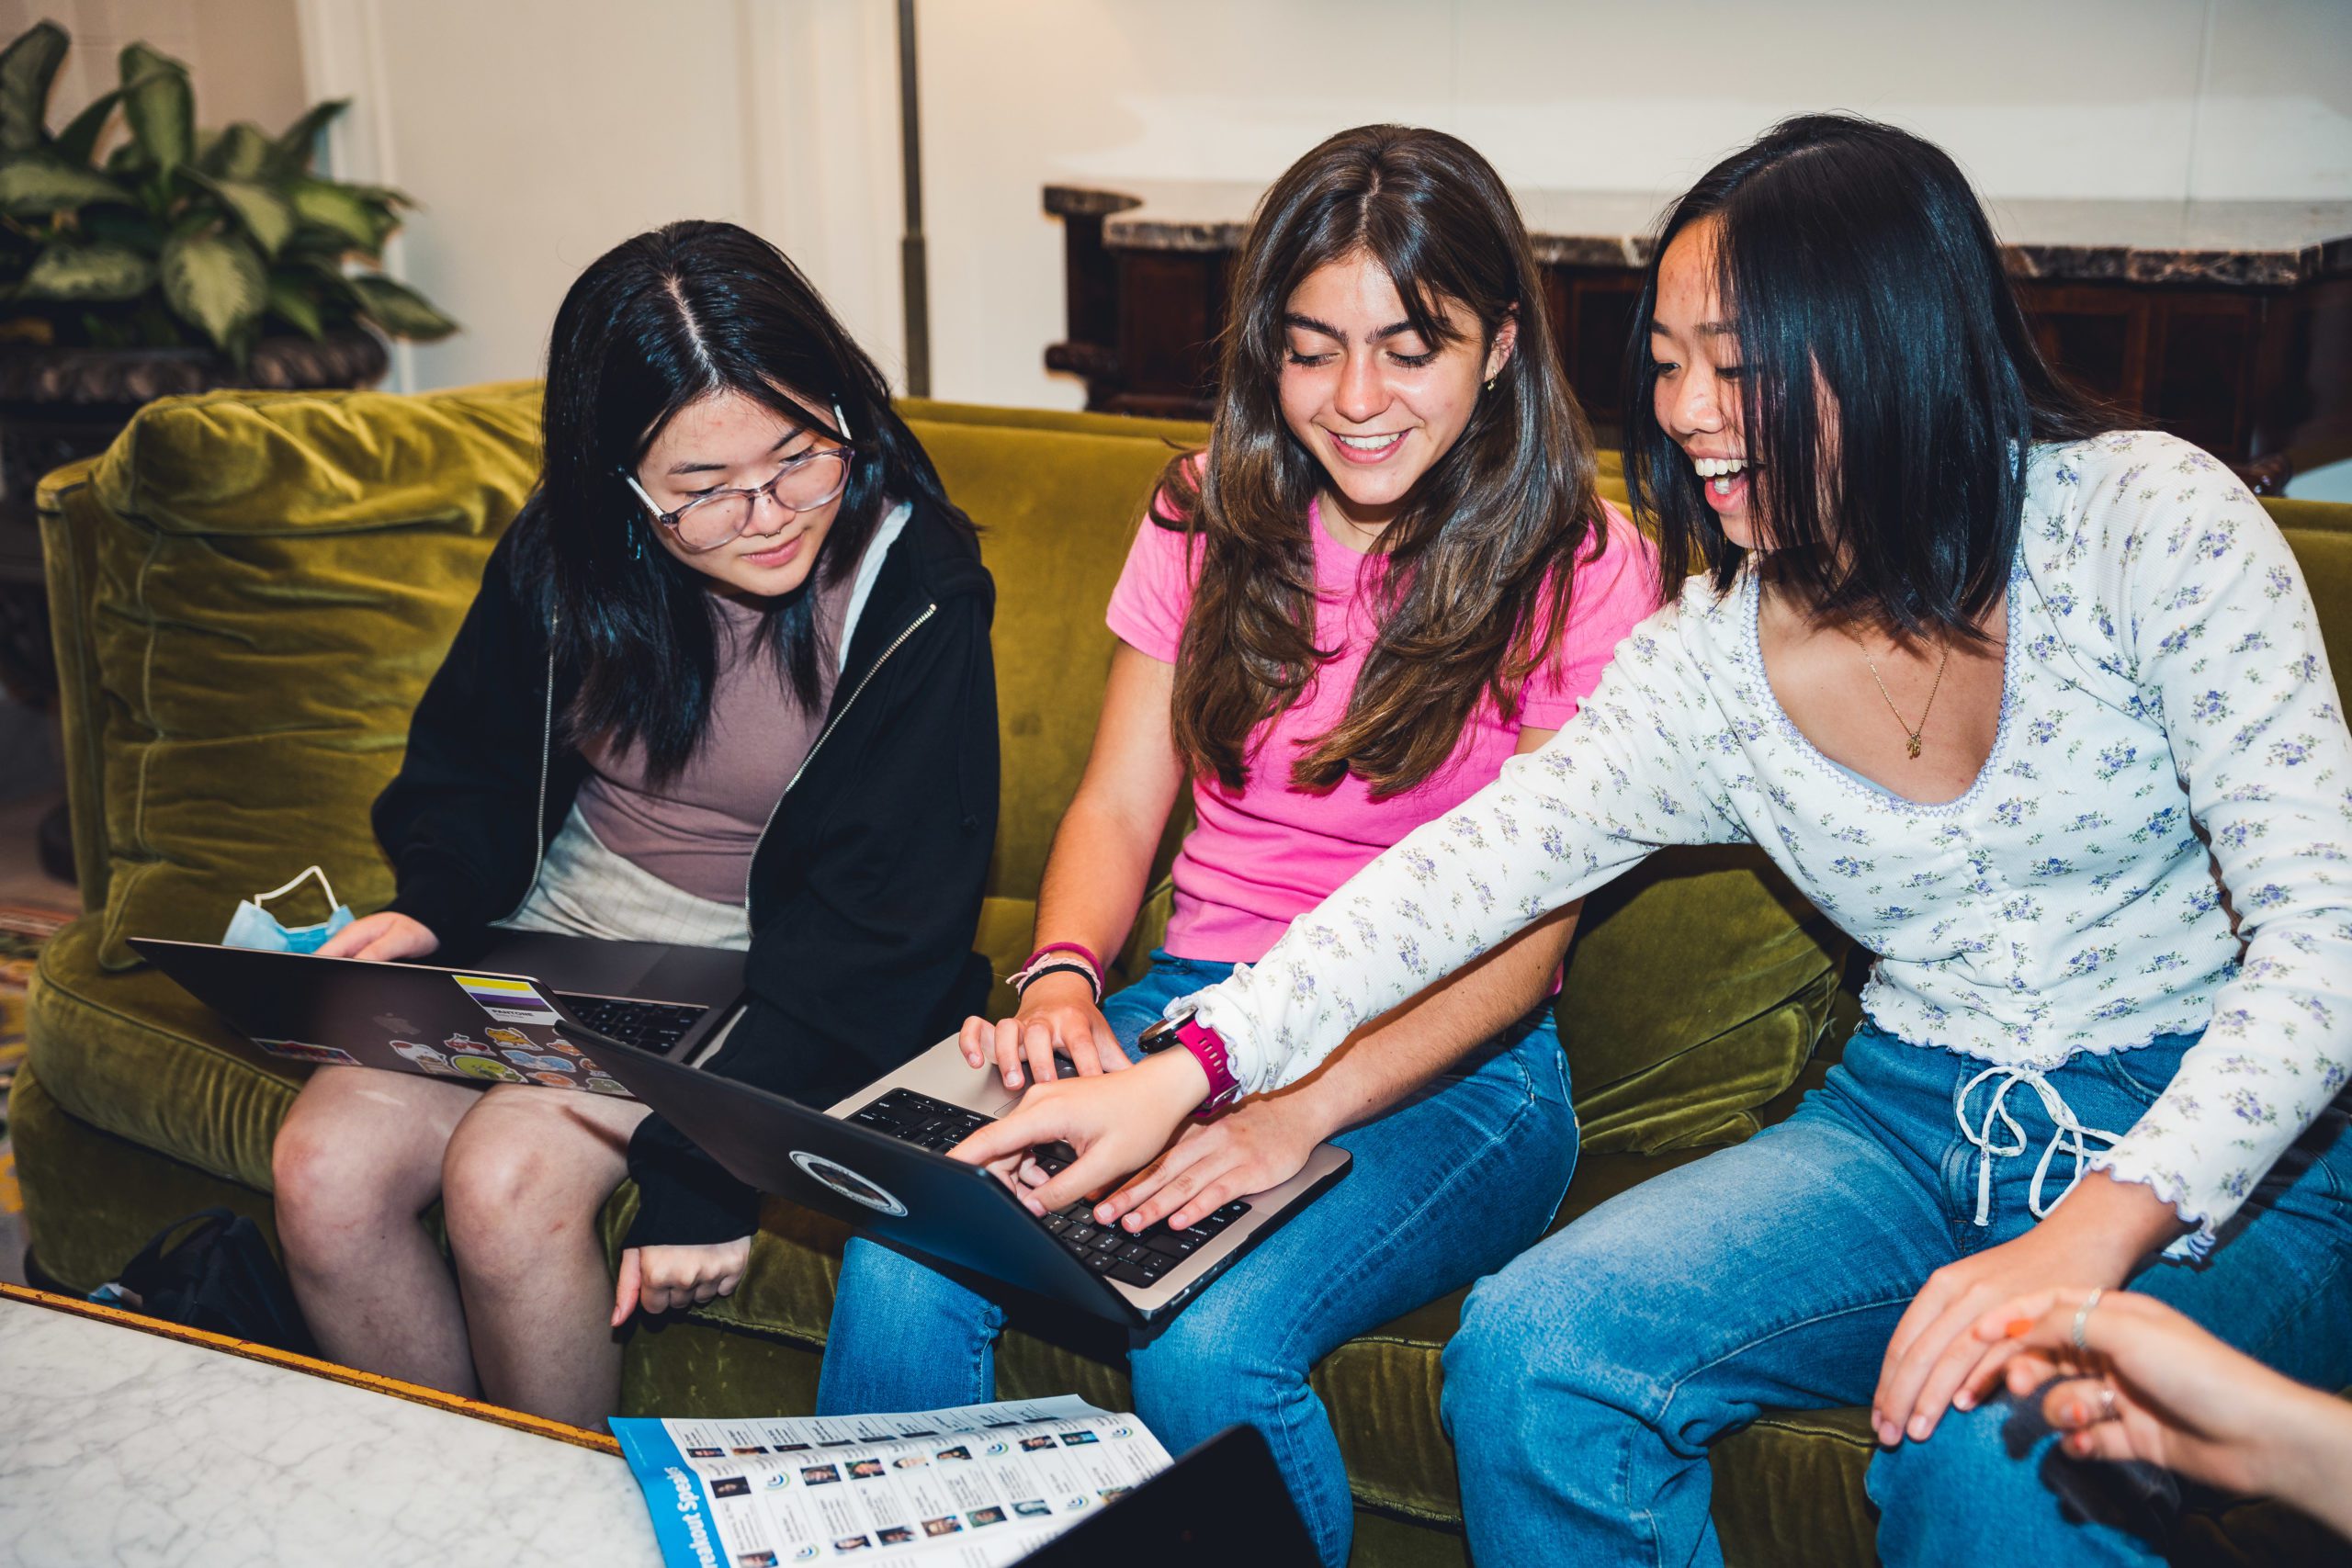 Three girls sitting on a couch looking at a computer